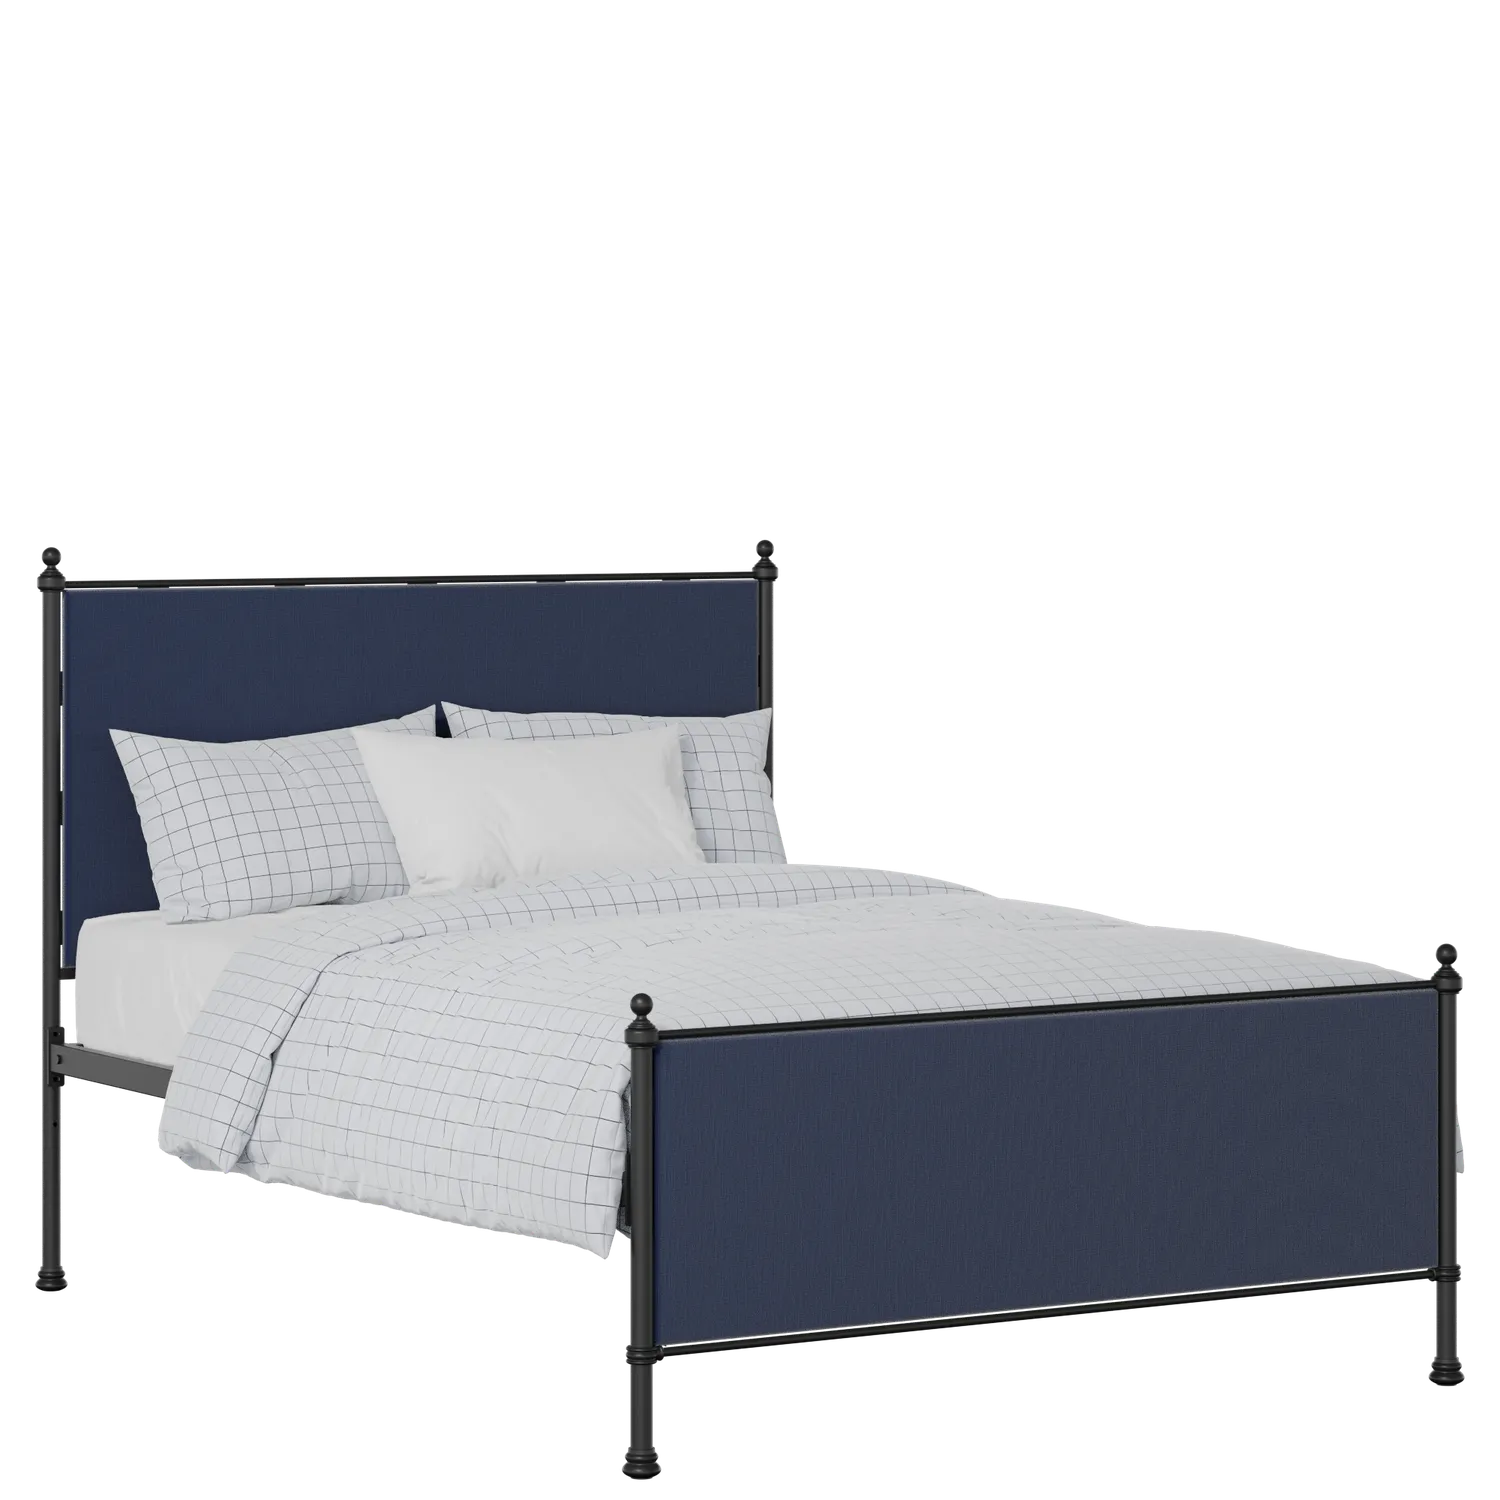 Neville iron/metal upholstered bed in black with blue fabric